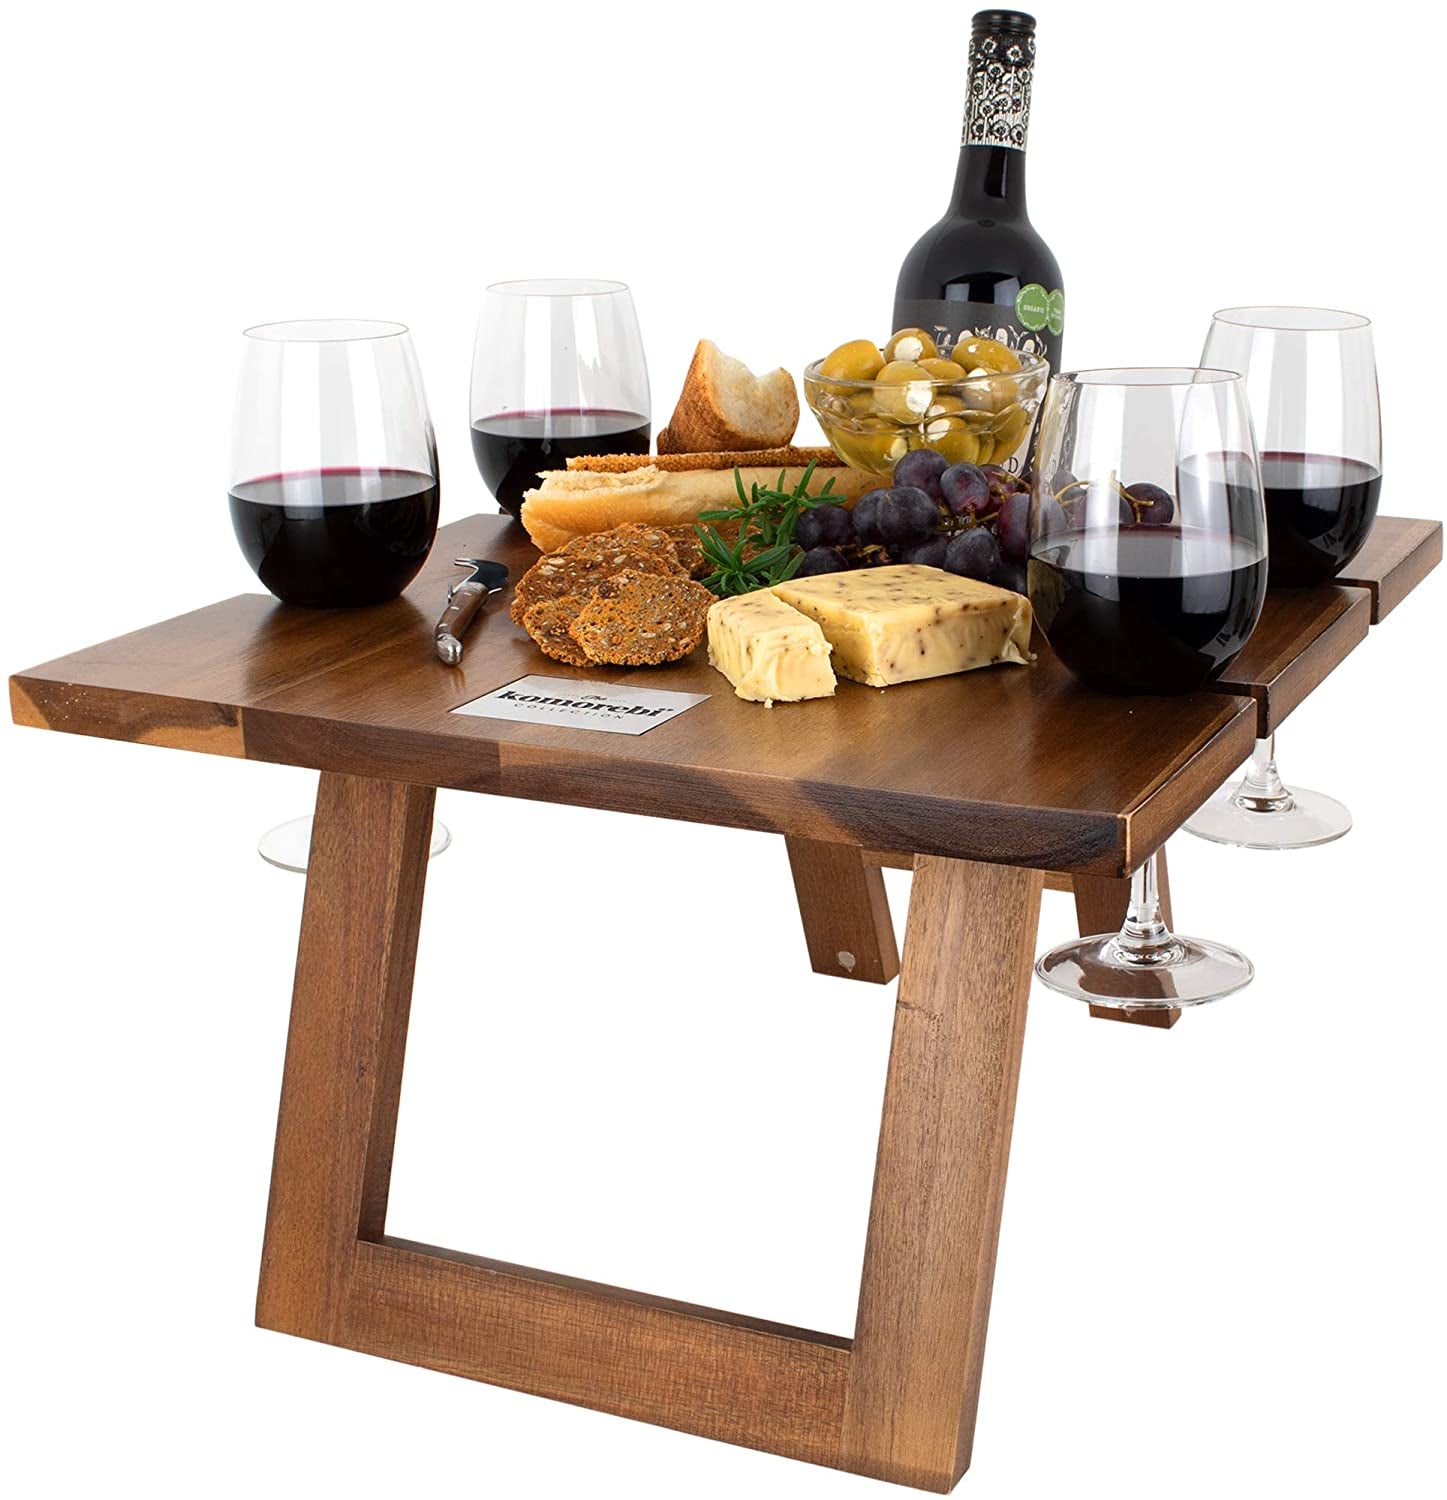 Komorebi, KOMOREBI Portable Folding Wine and Champagne Picnic Table - Lightweight Custom Acacia Wood Table - Foldable Legs, Food-Safe Top, Bottle & Glass Holders - Perfect for Camping, Beach, Outdoor Dinner